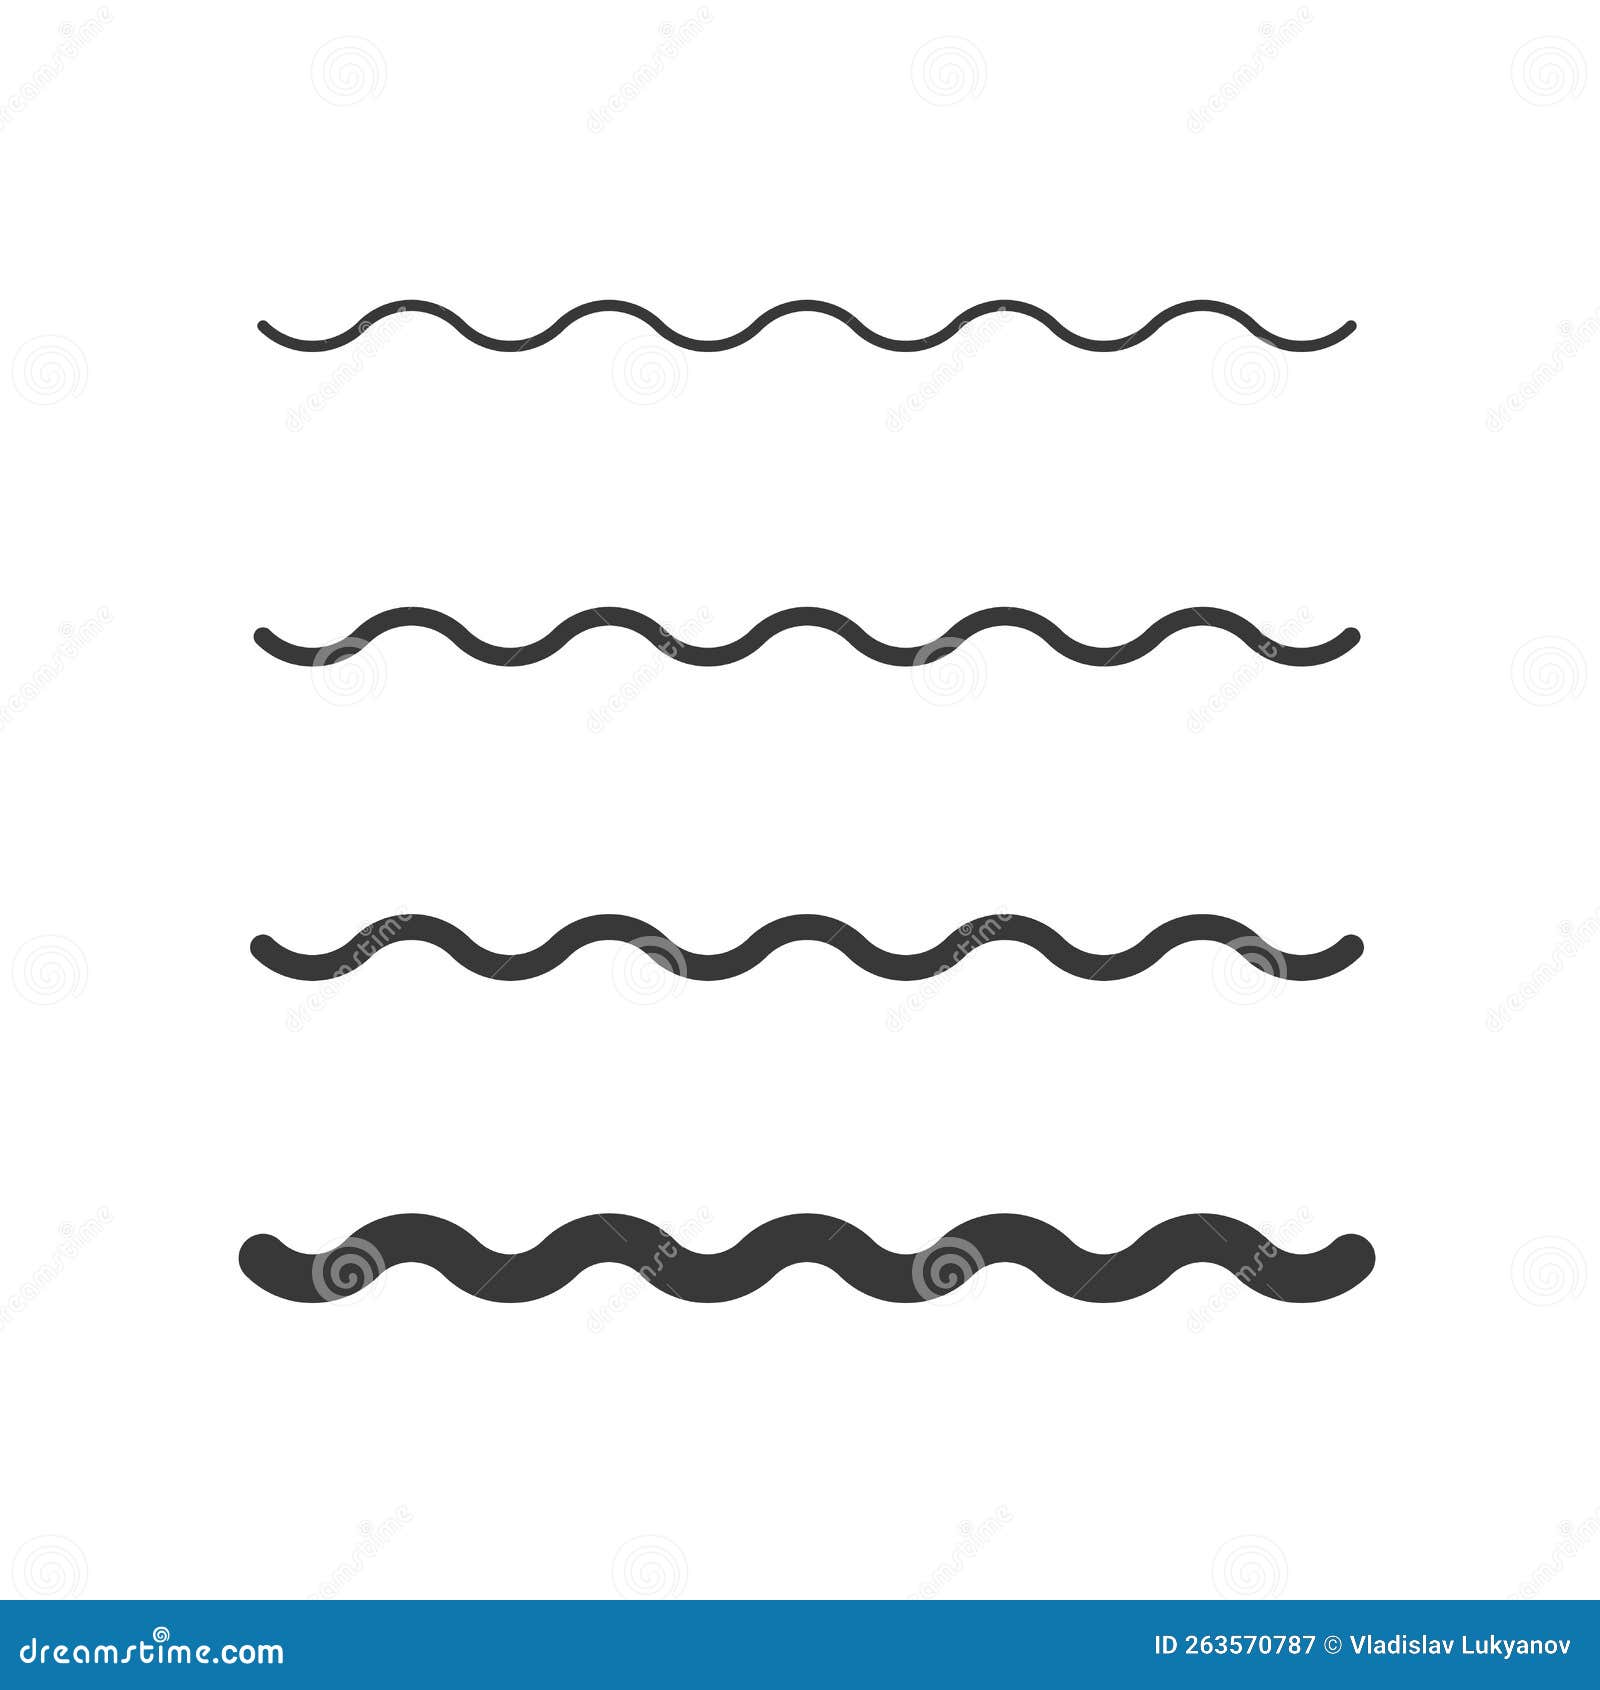 wave zigzag line simple thin to thick  decor   or single ripple curve zig zag wiggly separator pictogram